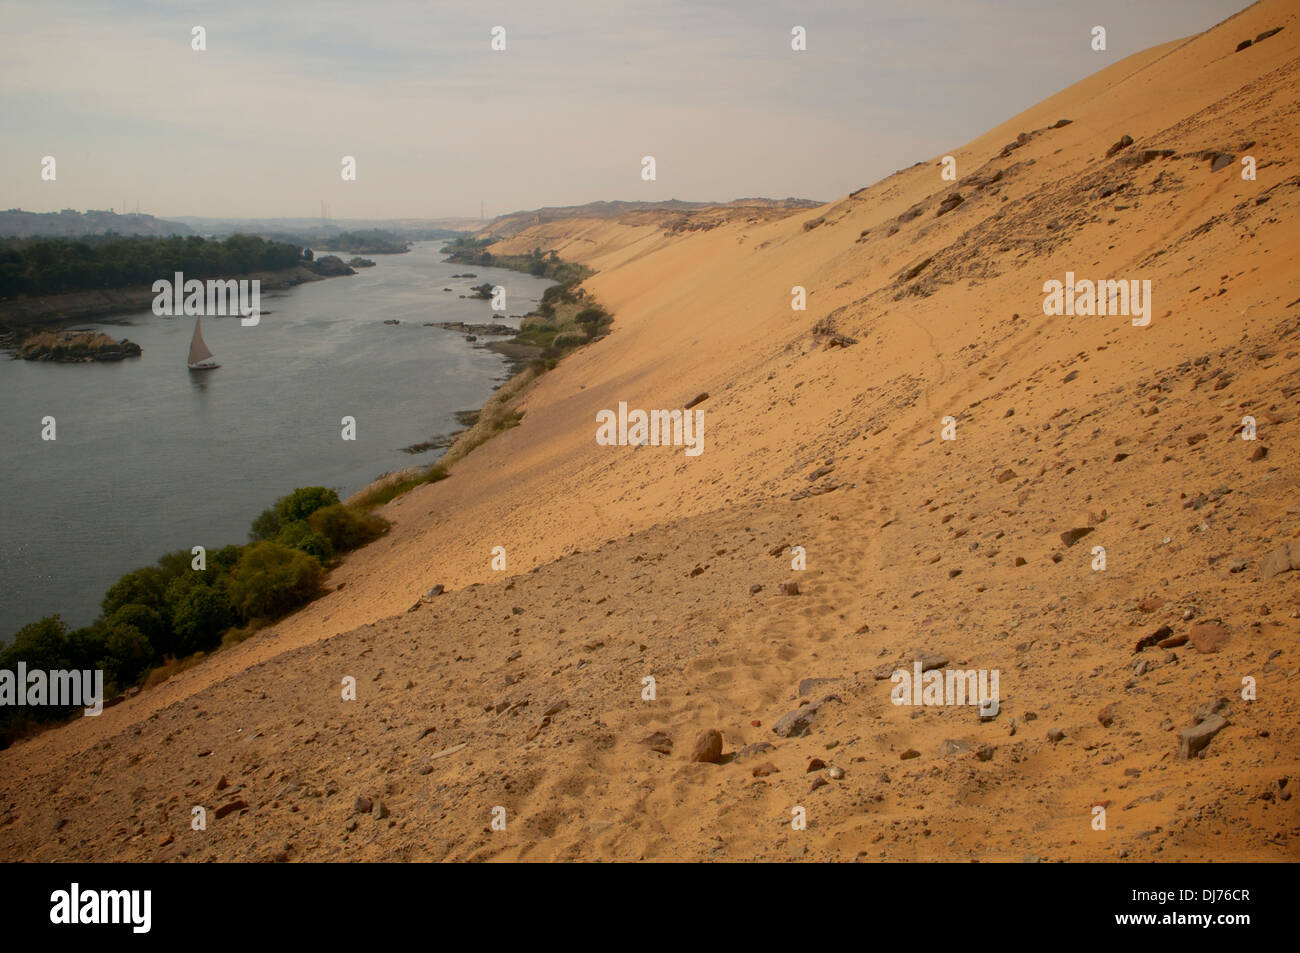 View of the Nile from a ridge on the east bank of the Nile at Aswan, Egypt. Stock Photo